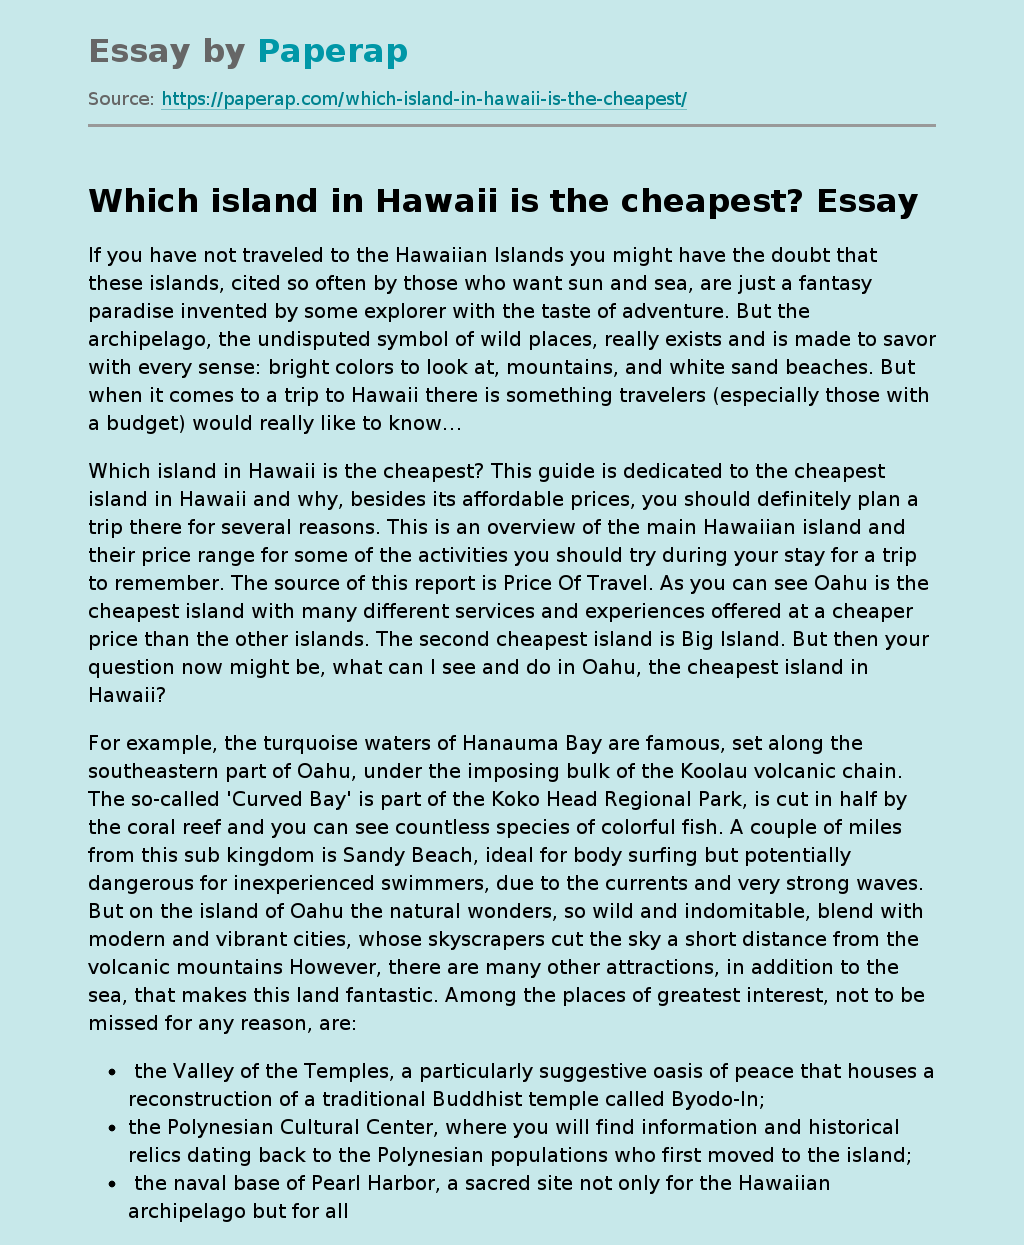 Which island in Hawaii is the cheapest?